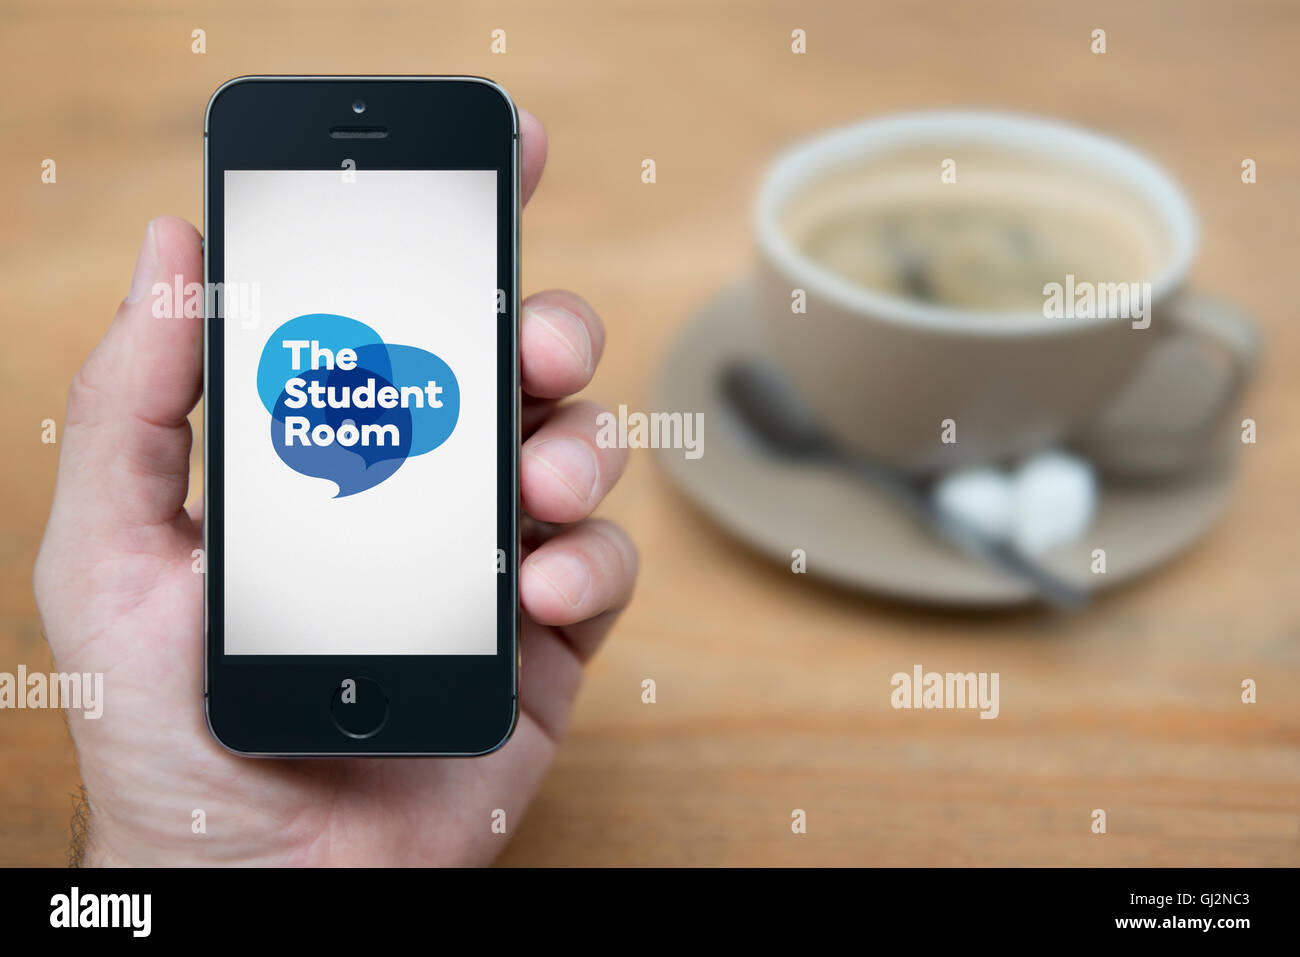 A man looks at his iPhone which displays the Student Room logo, while sat with a cup of coffee (Editorial use only). Stock Photo